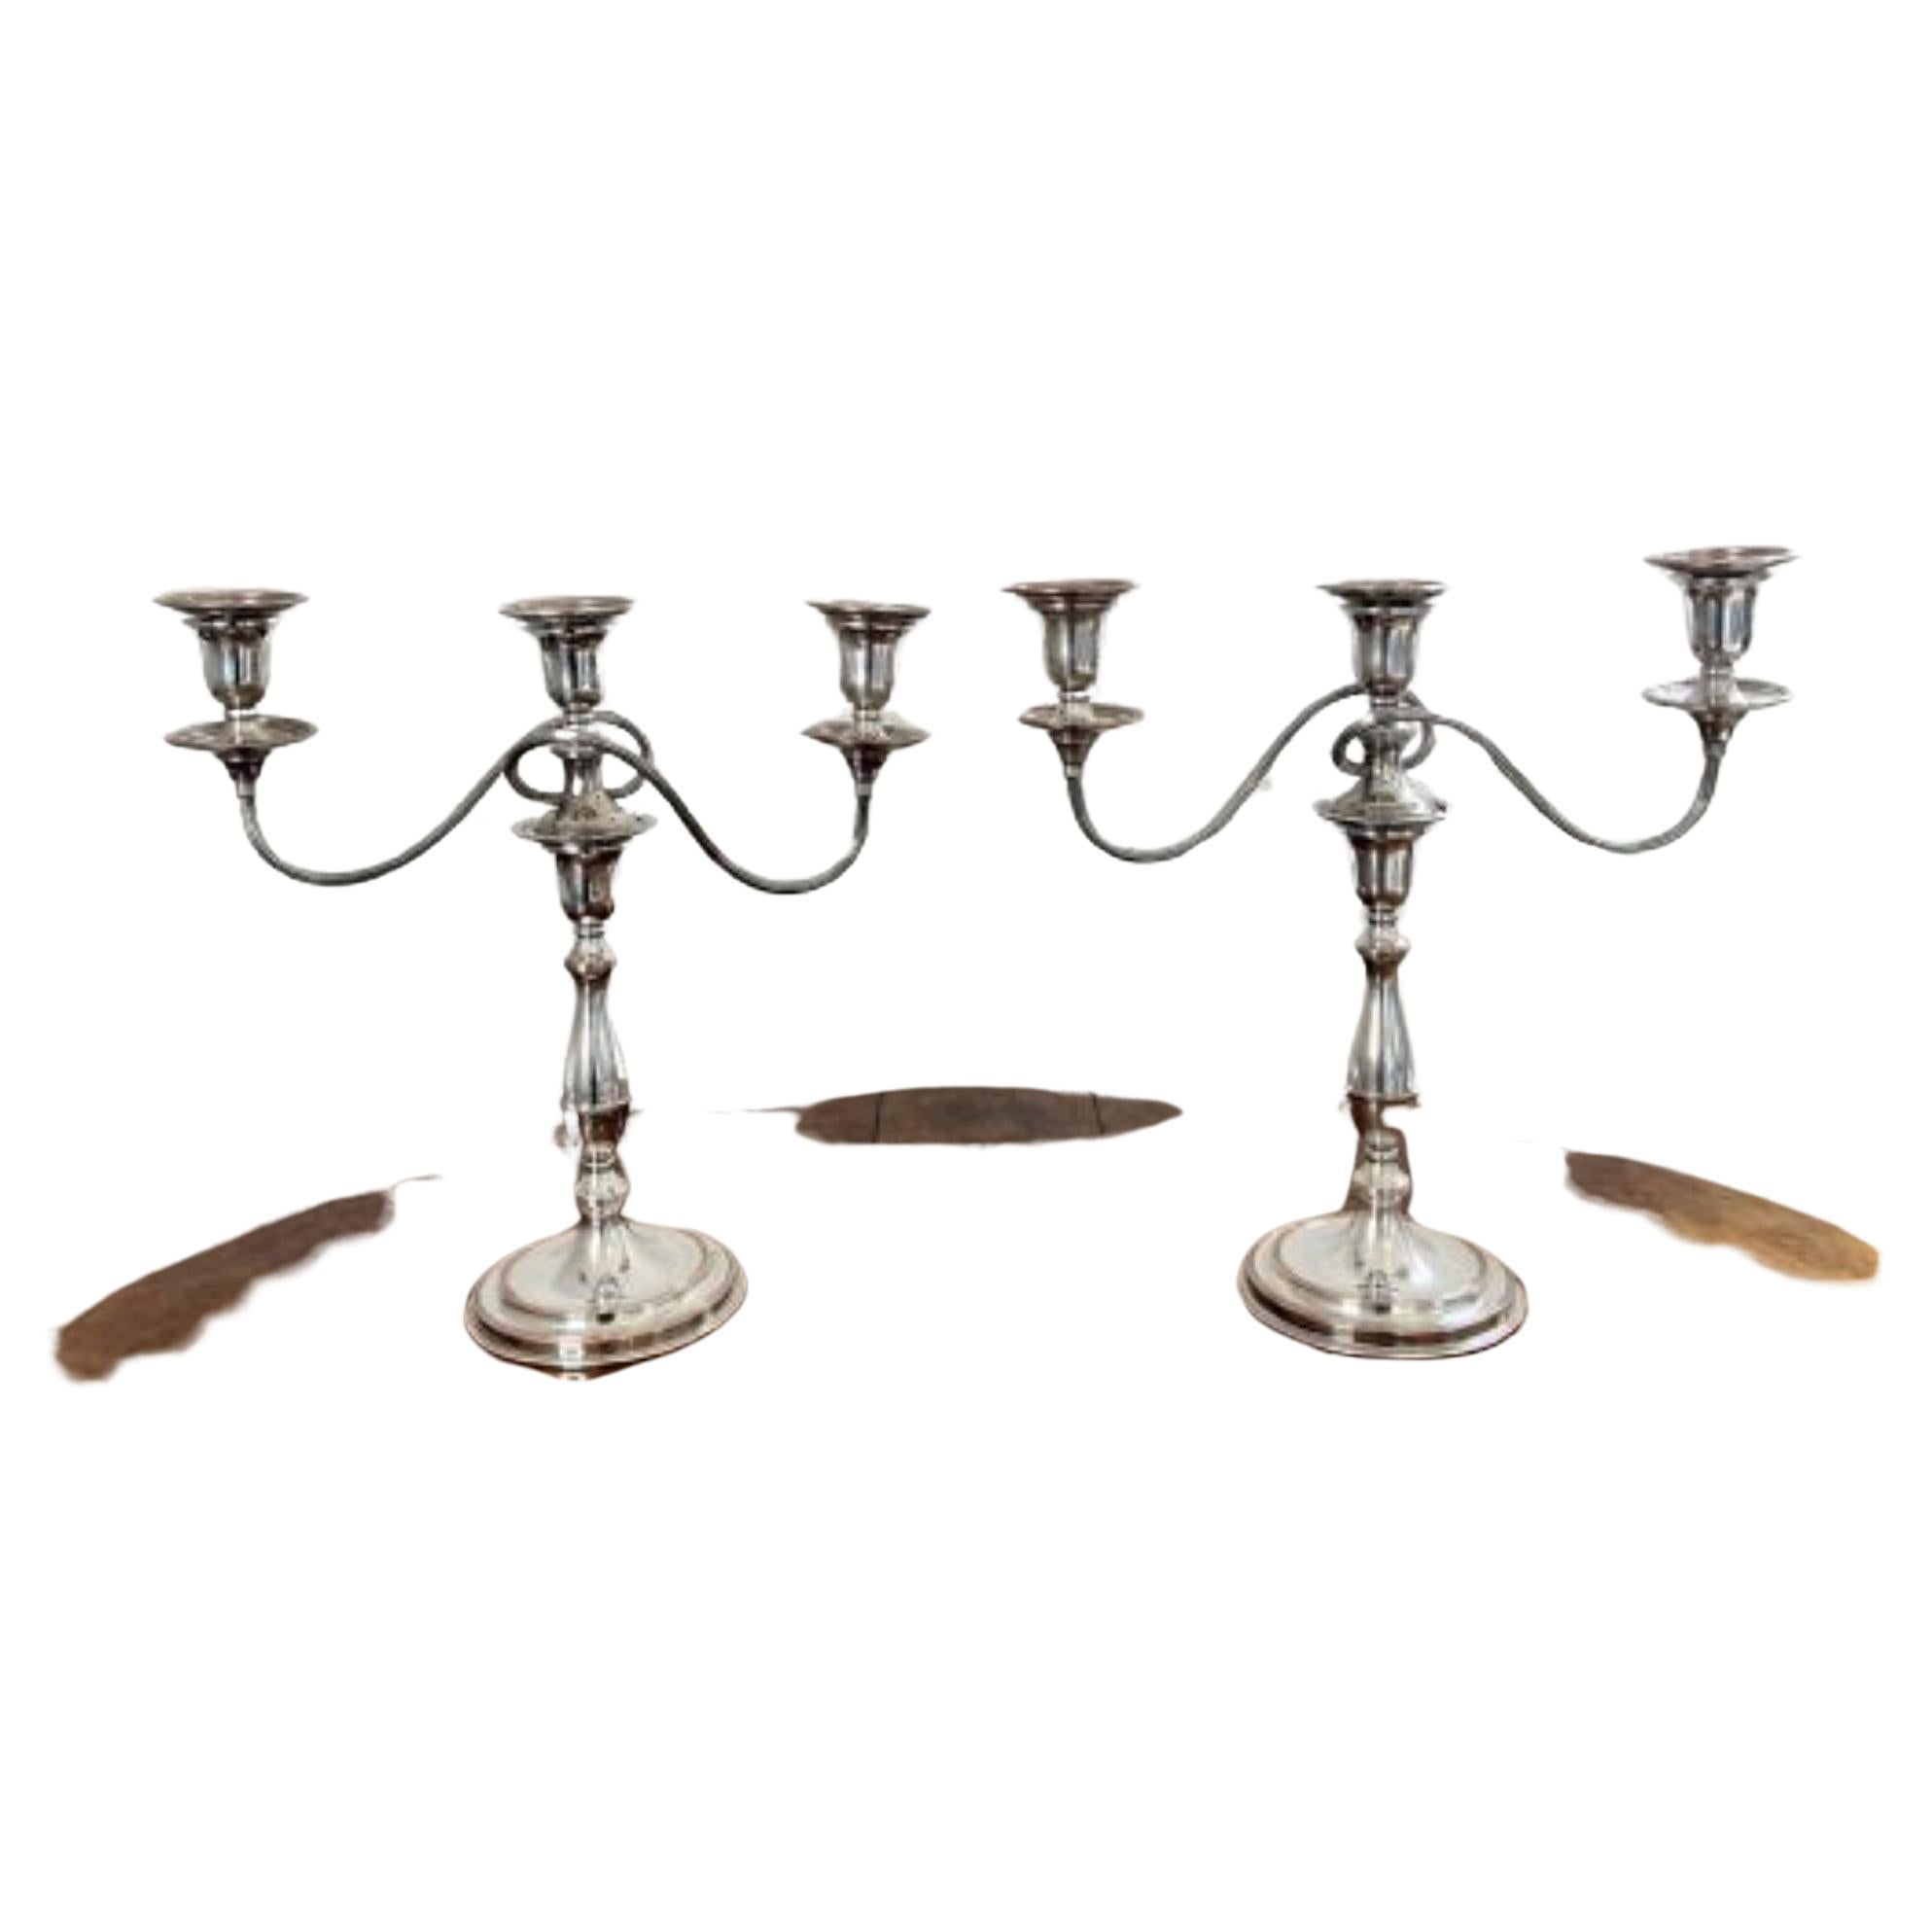 Stunning pair of quality antique Edwardian silver plated candelabras 